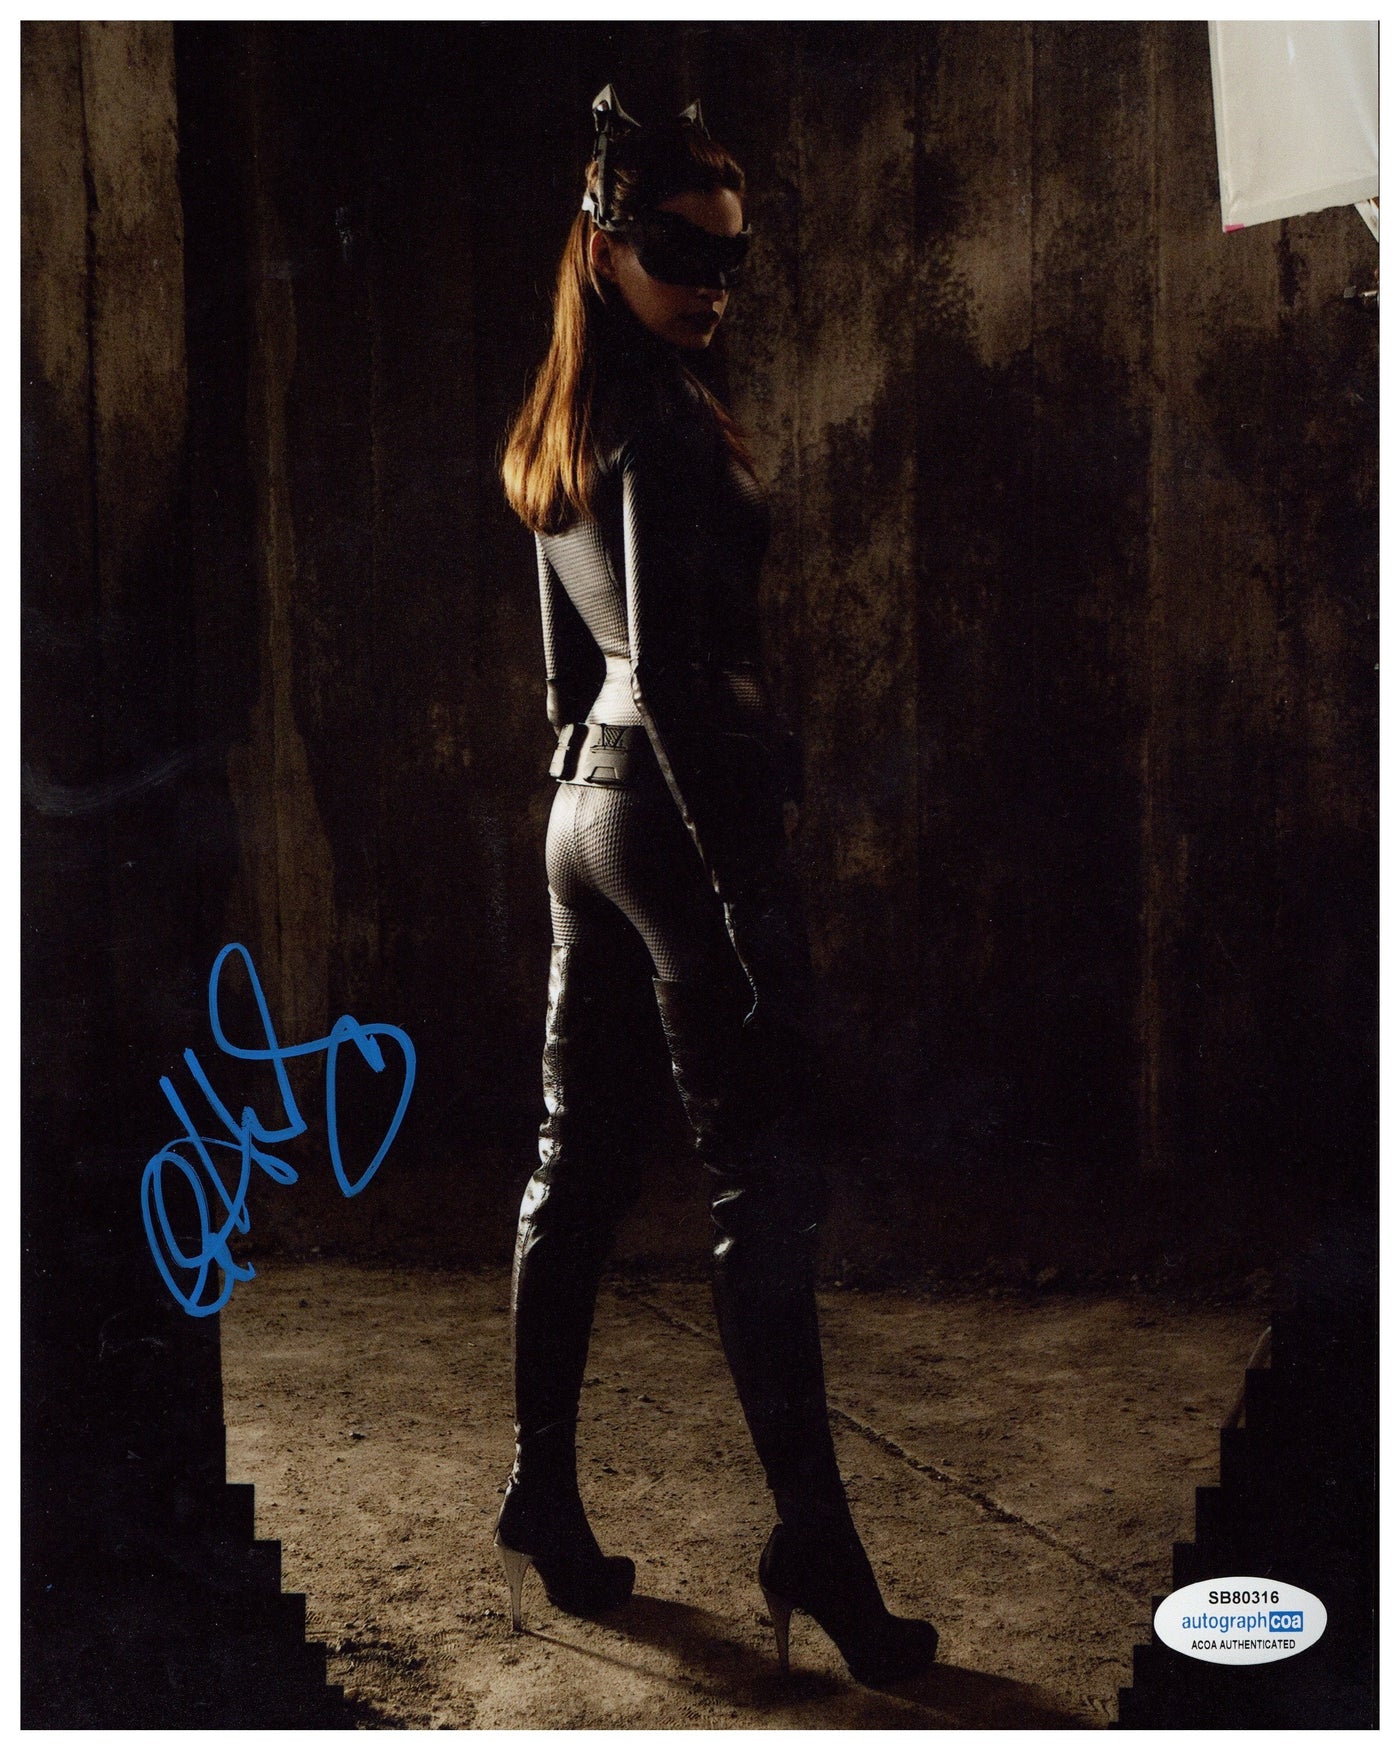 Anne Hathaway Signed 8x10 Photograph The Dark Knight Rises Autographed ACOA